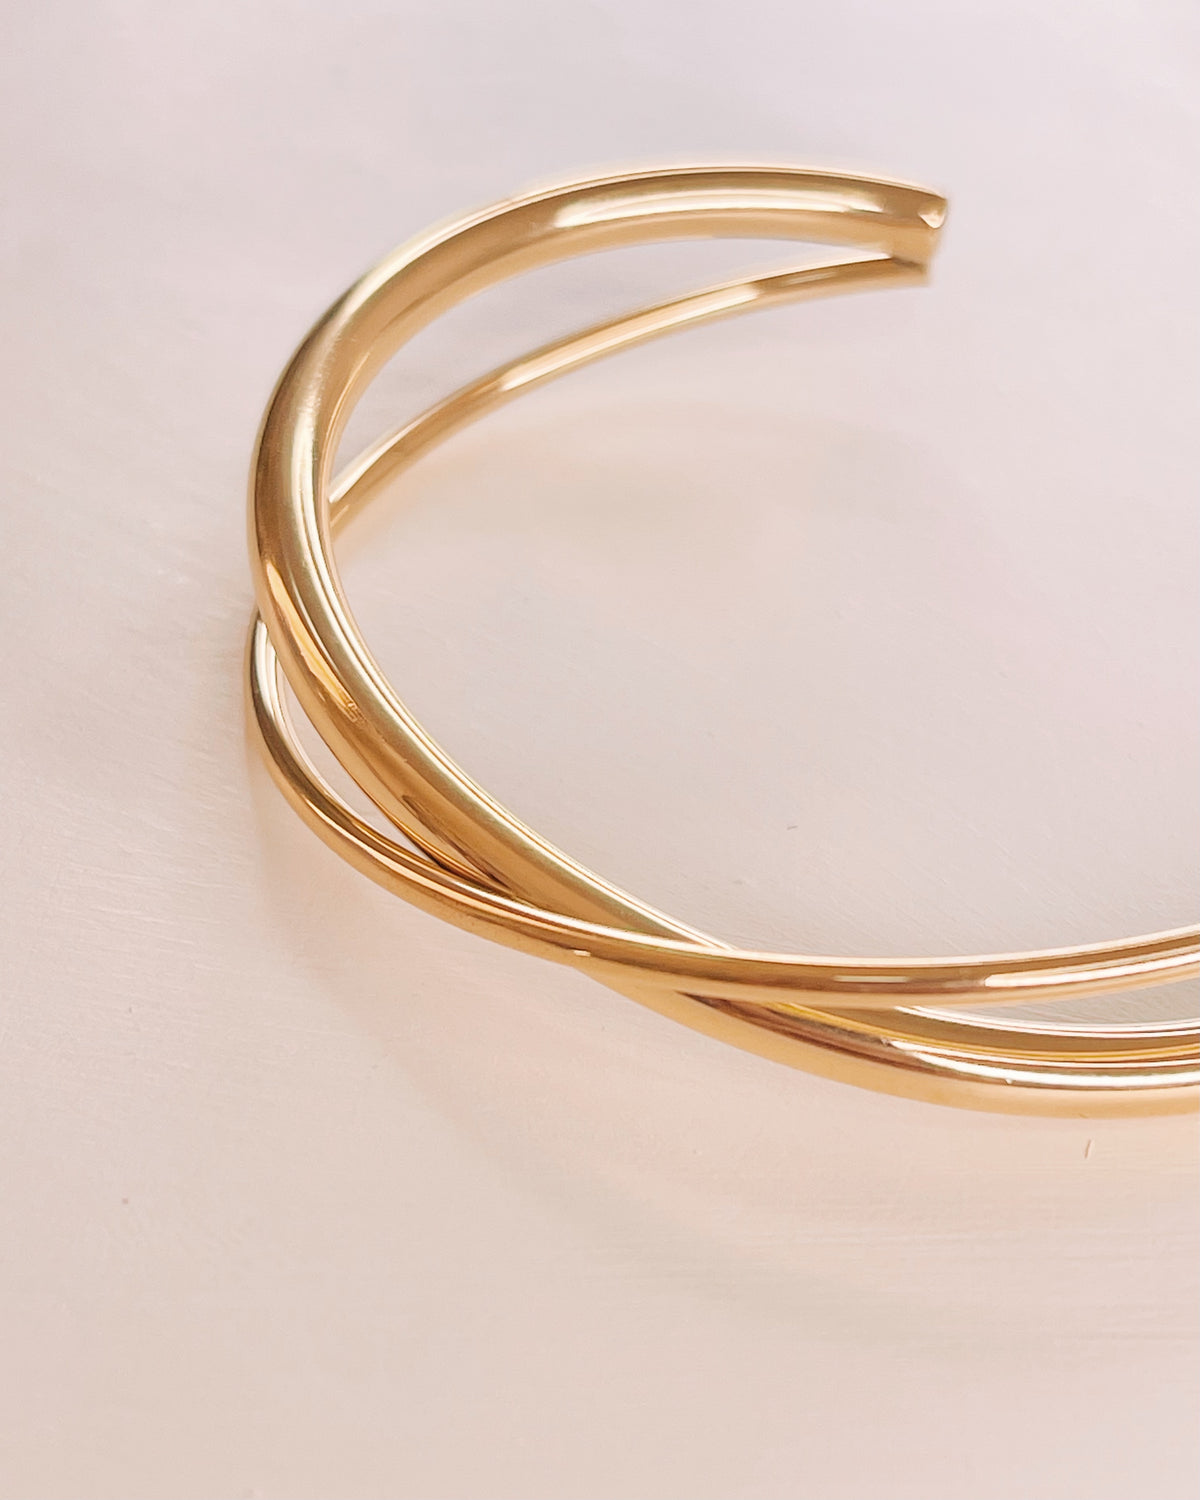 Nellie Intertwined Design Gold Bangle